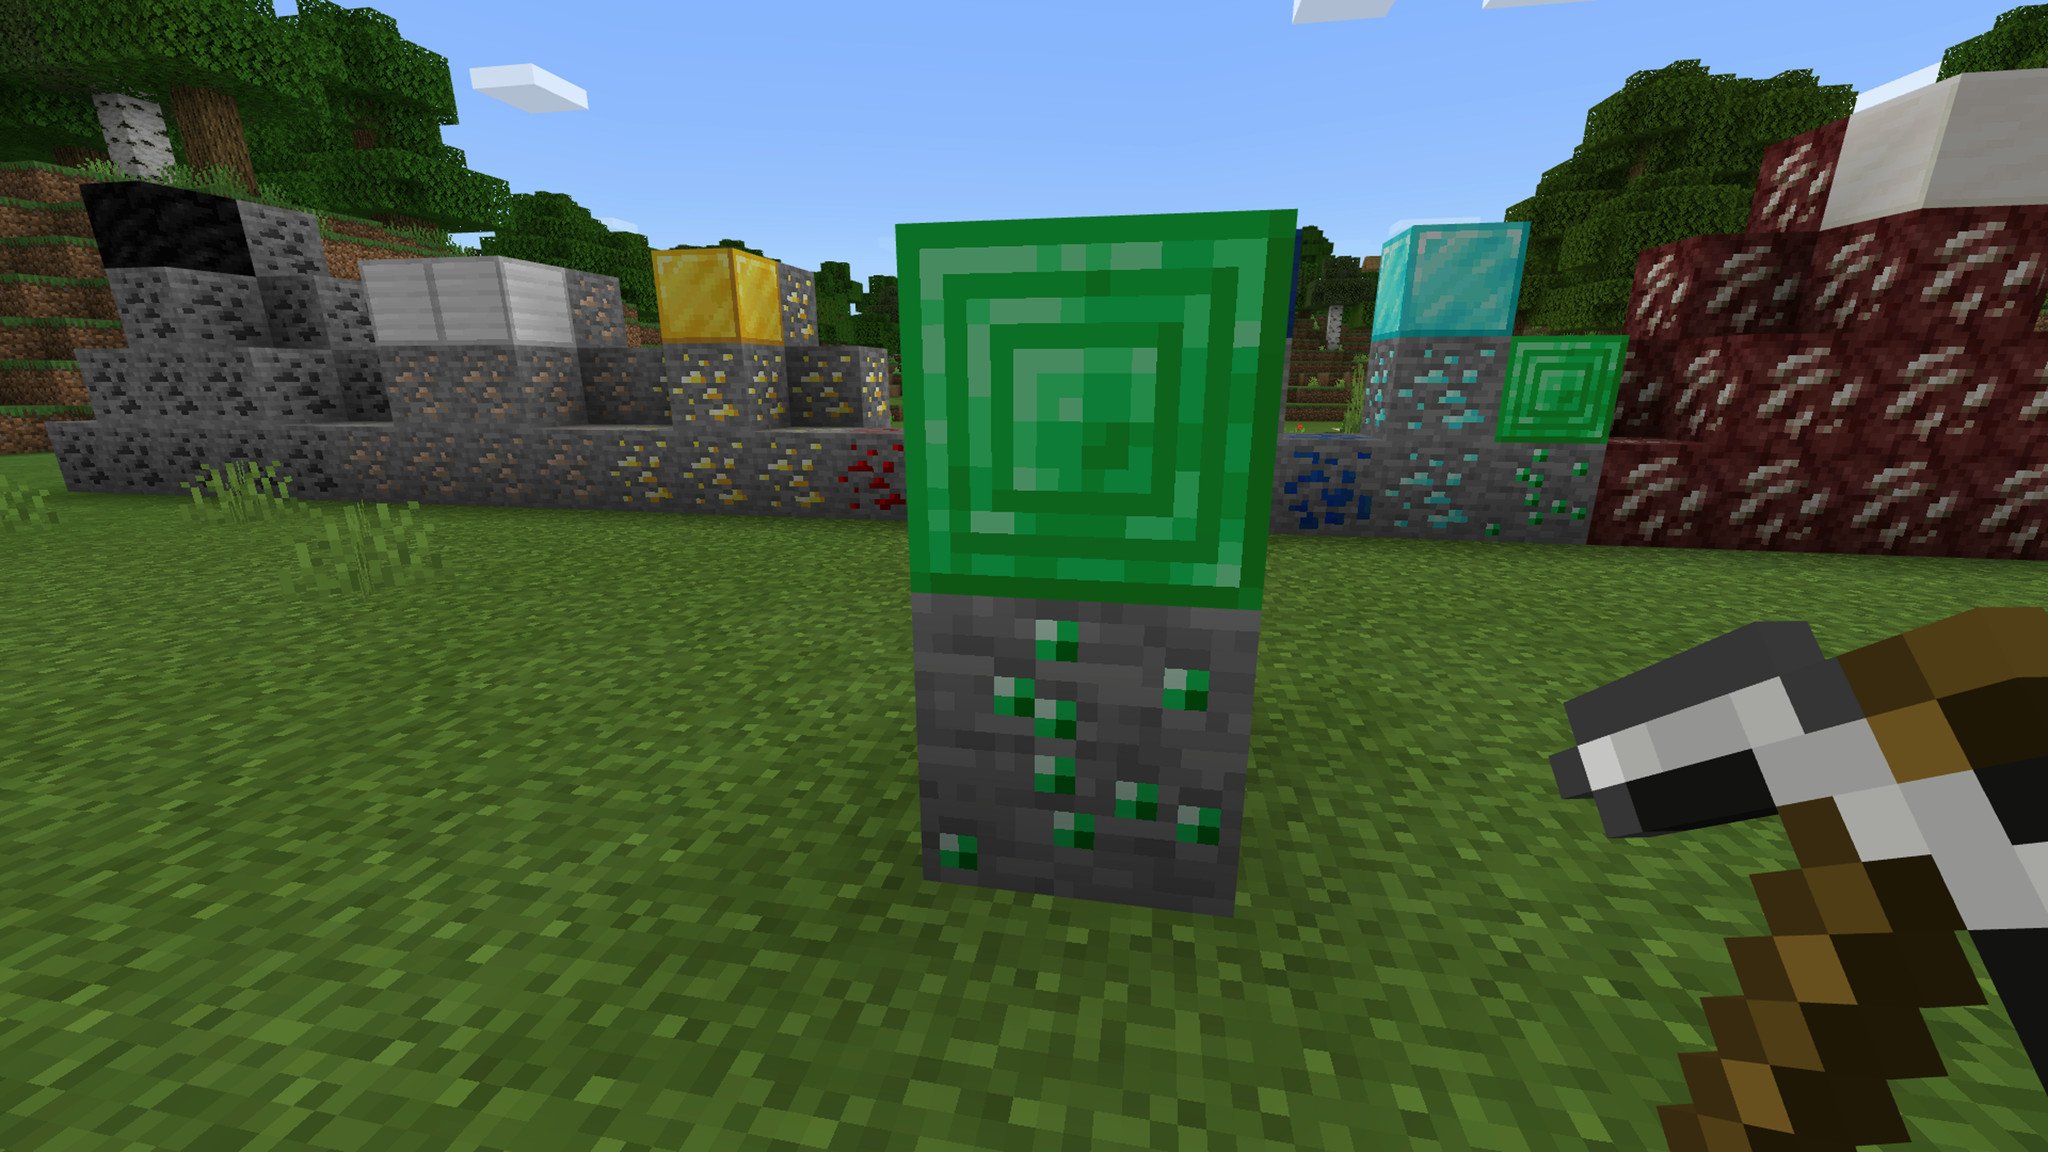 Some emerald ore and an emerald block